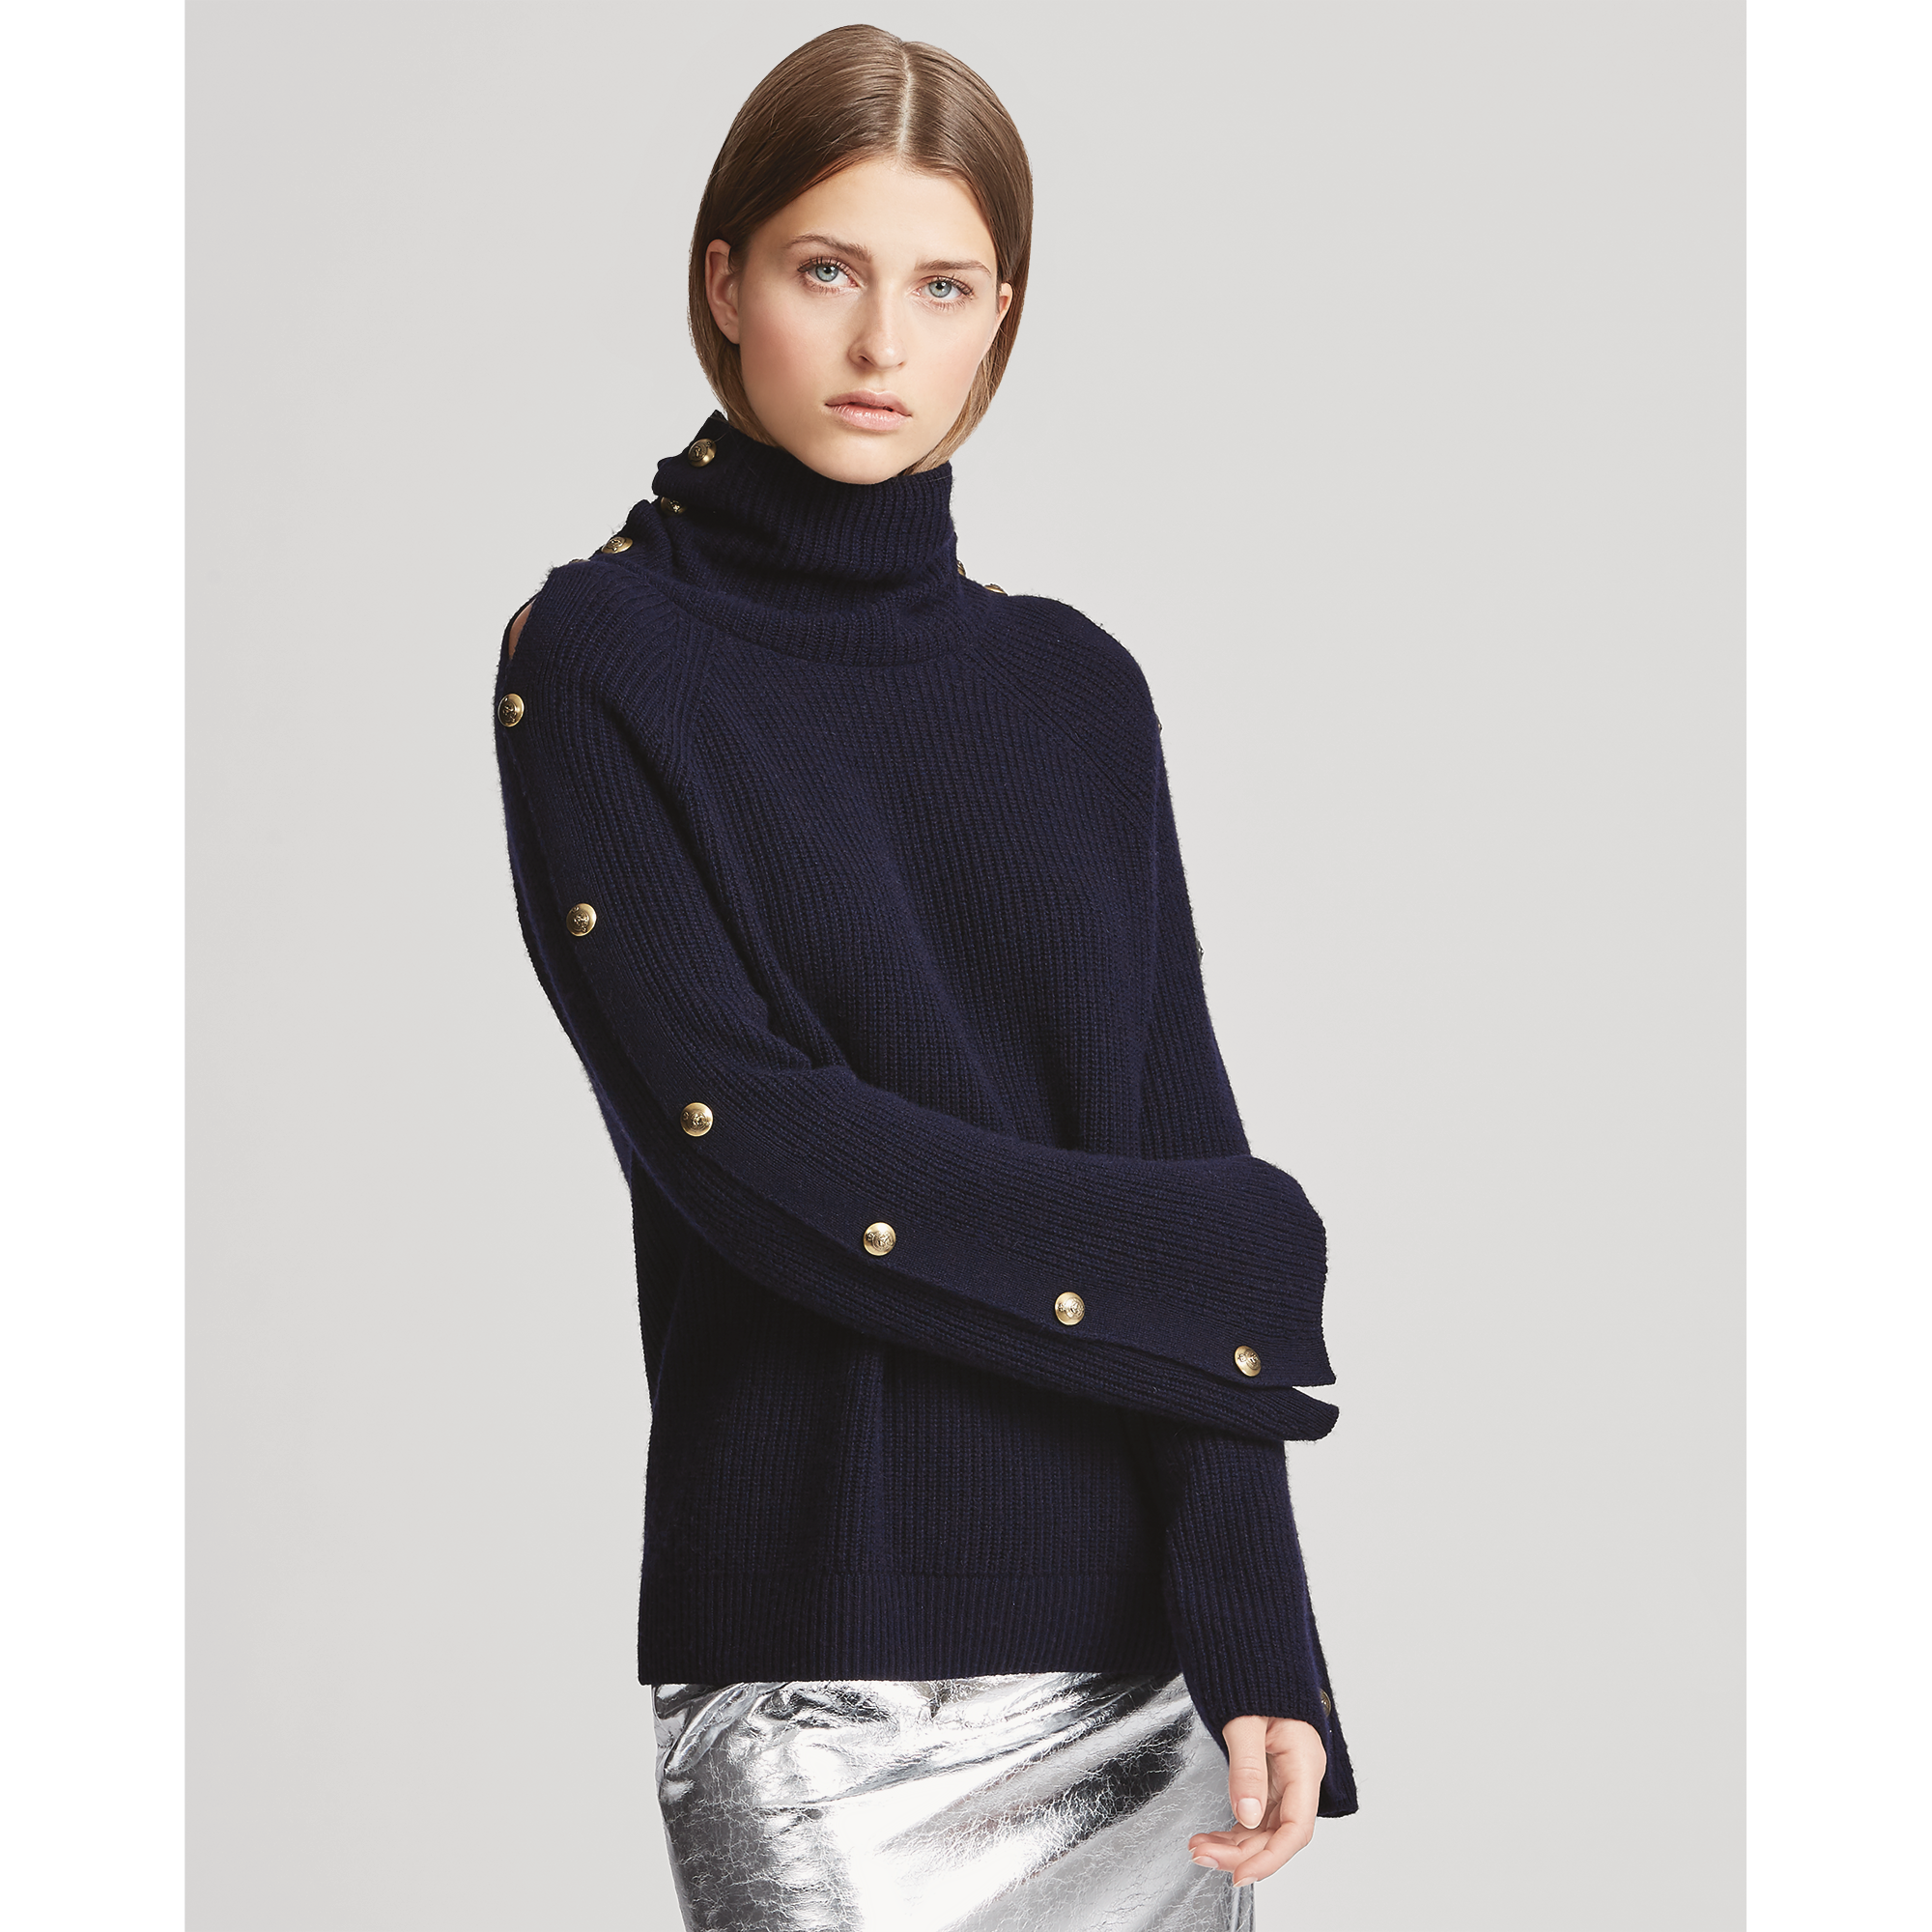 Fall Sweaters: Finding the Perfect Look for a Night on the Town Ralph Lauren